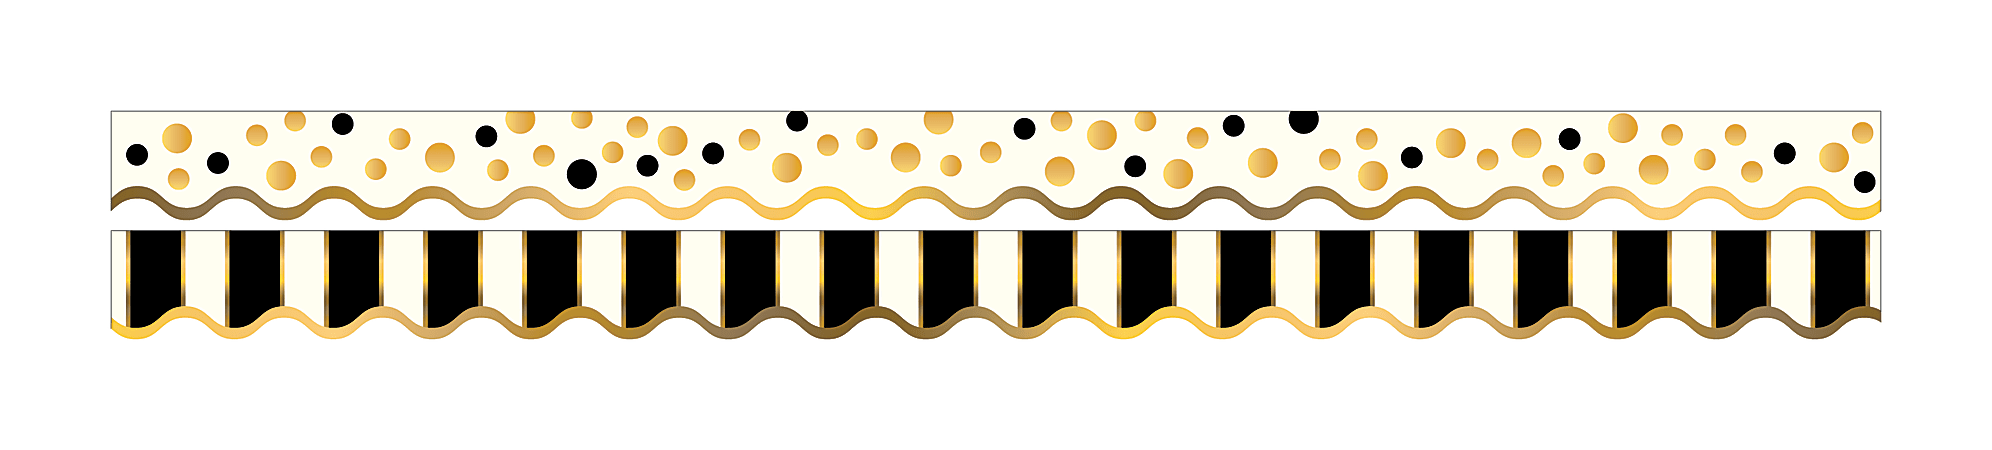 Barker Creek Scalloped-Edge Double-Sided Borders, 2 1/4" x 36", Gold Bars, Pack Of 13